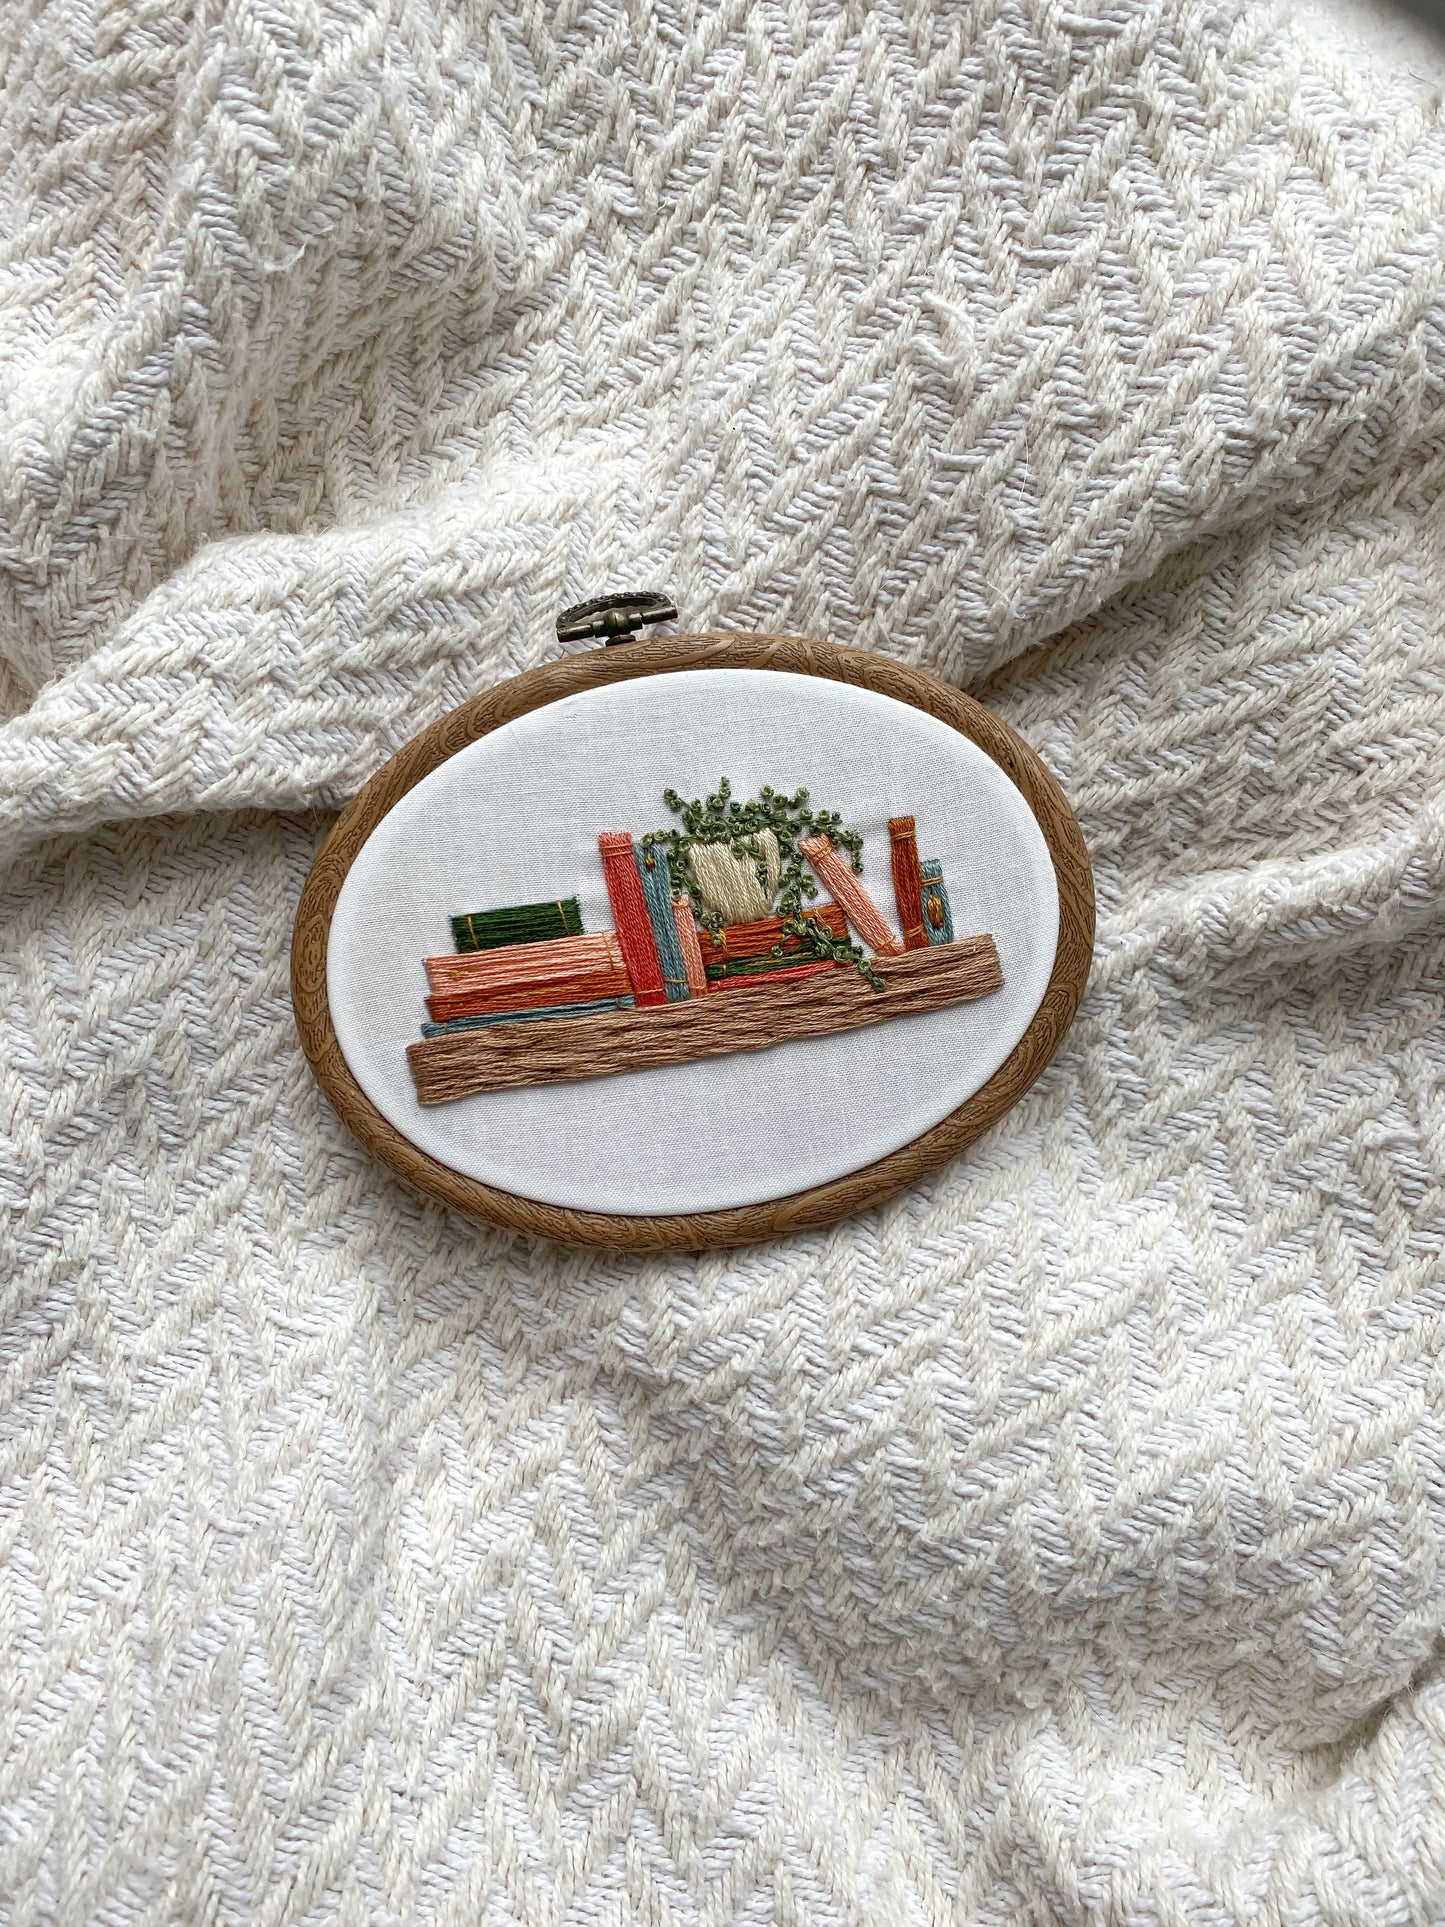 Read Between the Vines || Ready-to-Ship Original Embroidery Hoop Artwork